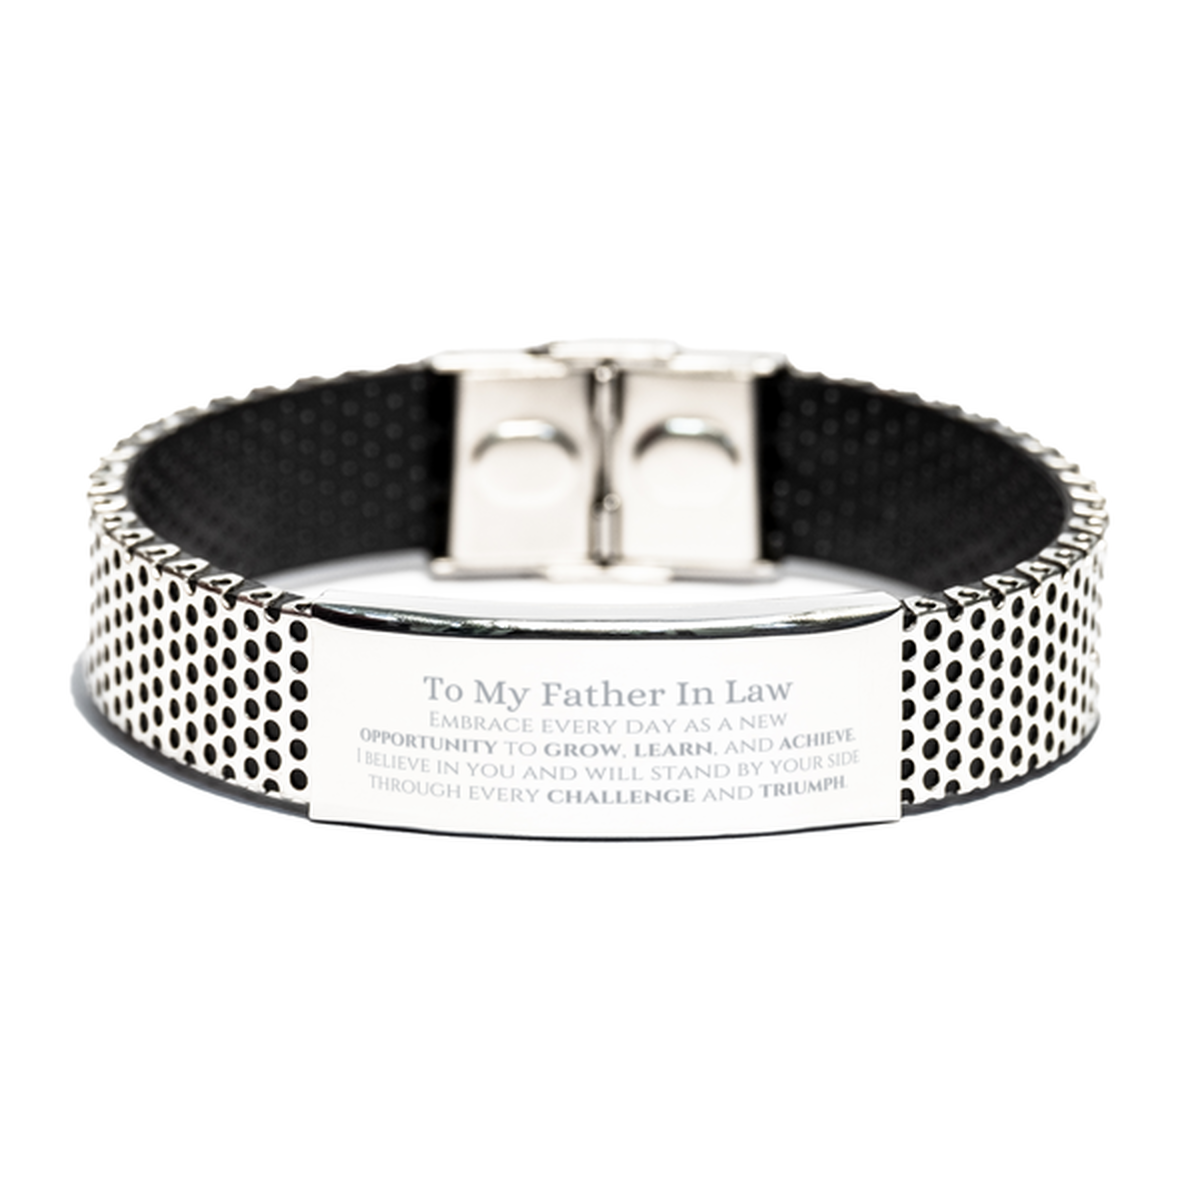 To My Father In Law Gifts, I believe in you and will stand by your side, Inspirational Stainless Steel Bracelet For Father In Law, Birthday Christmas Motivational Father In Law Gifts